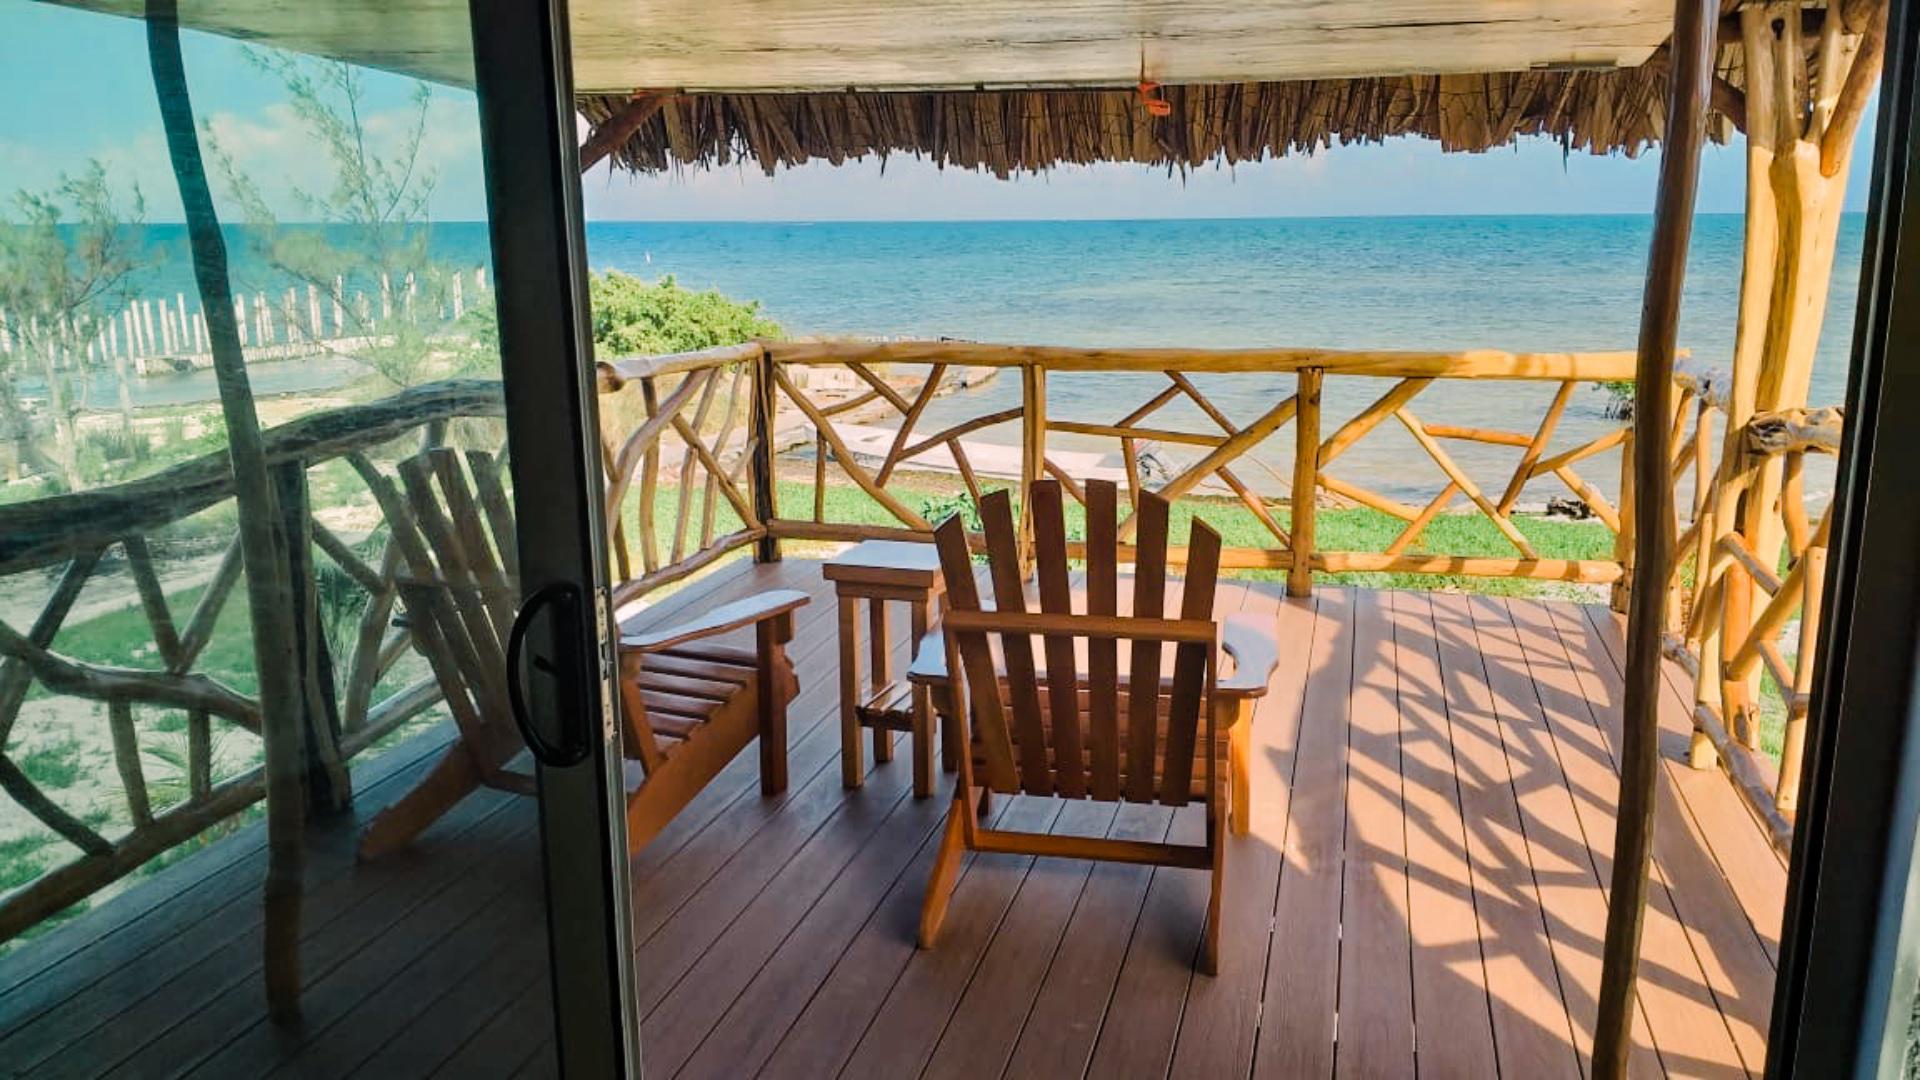 Porch view from Palapa Pineapple Dome Home.